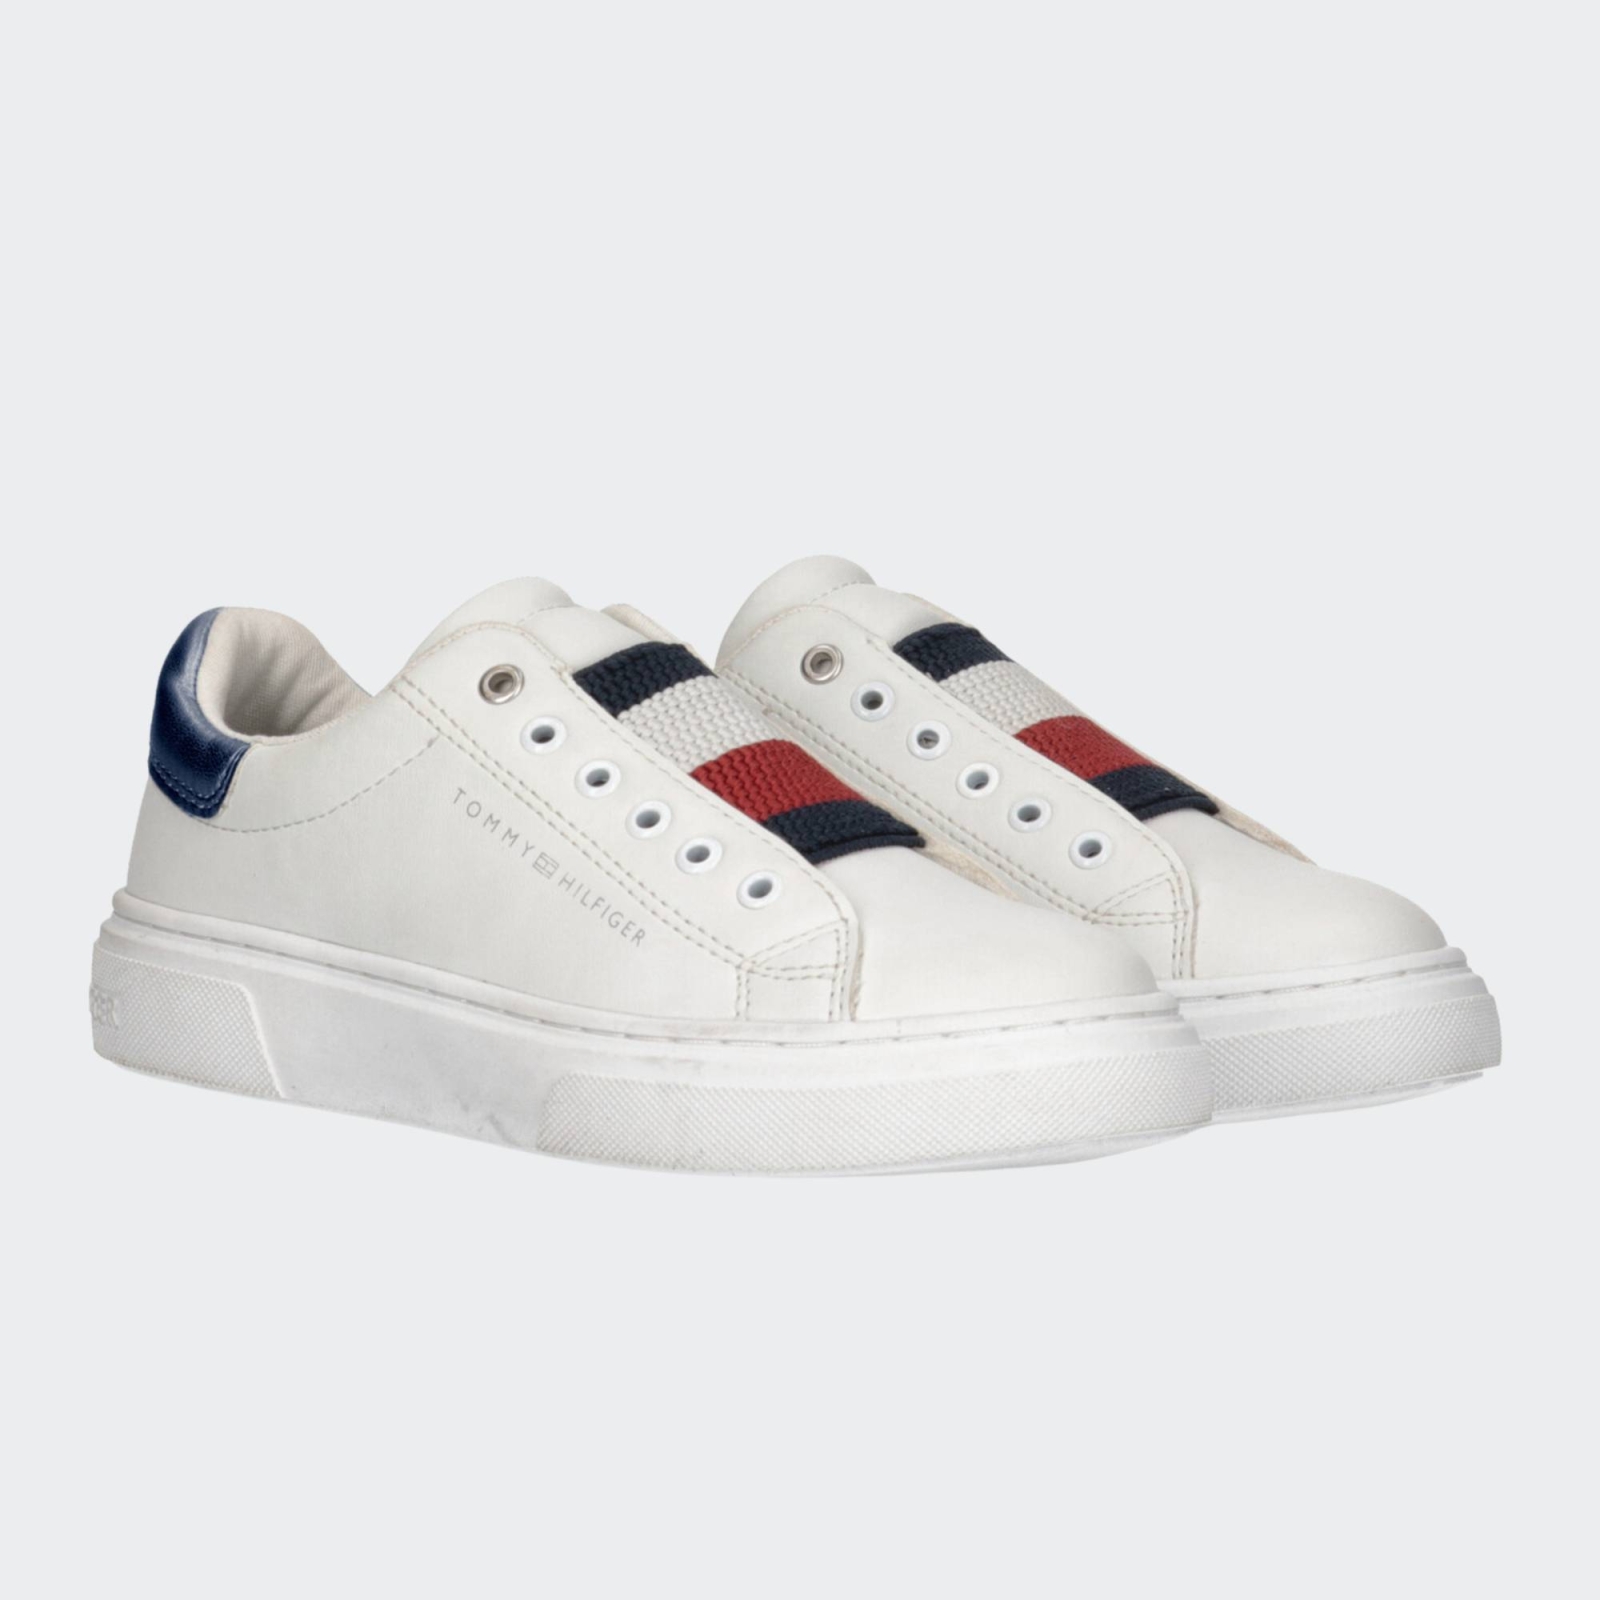 TOMMY LOW CUT LACE-UP SNEAKER